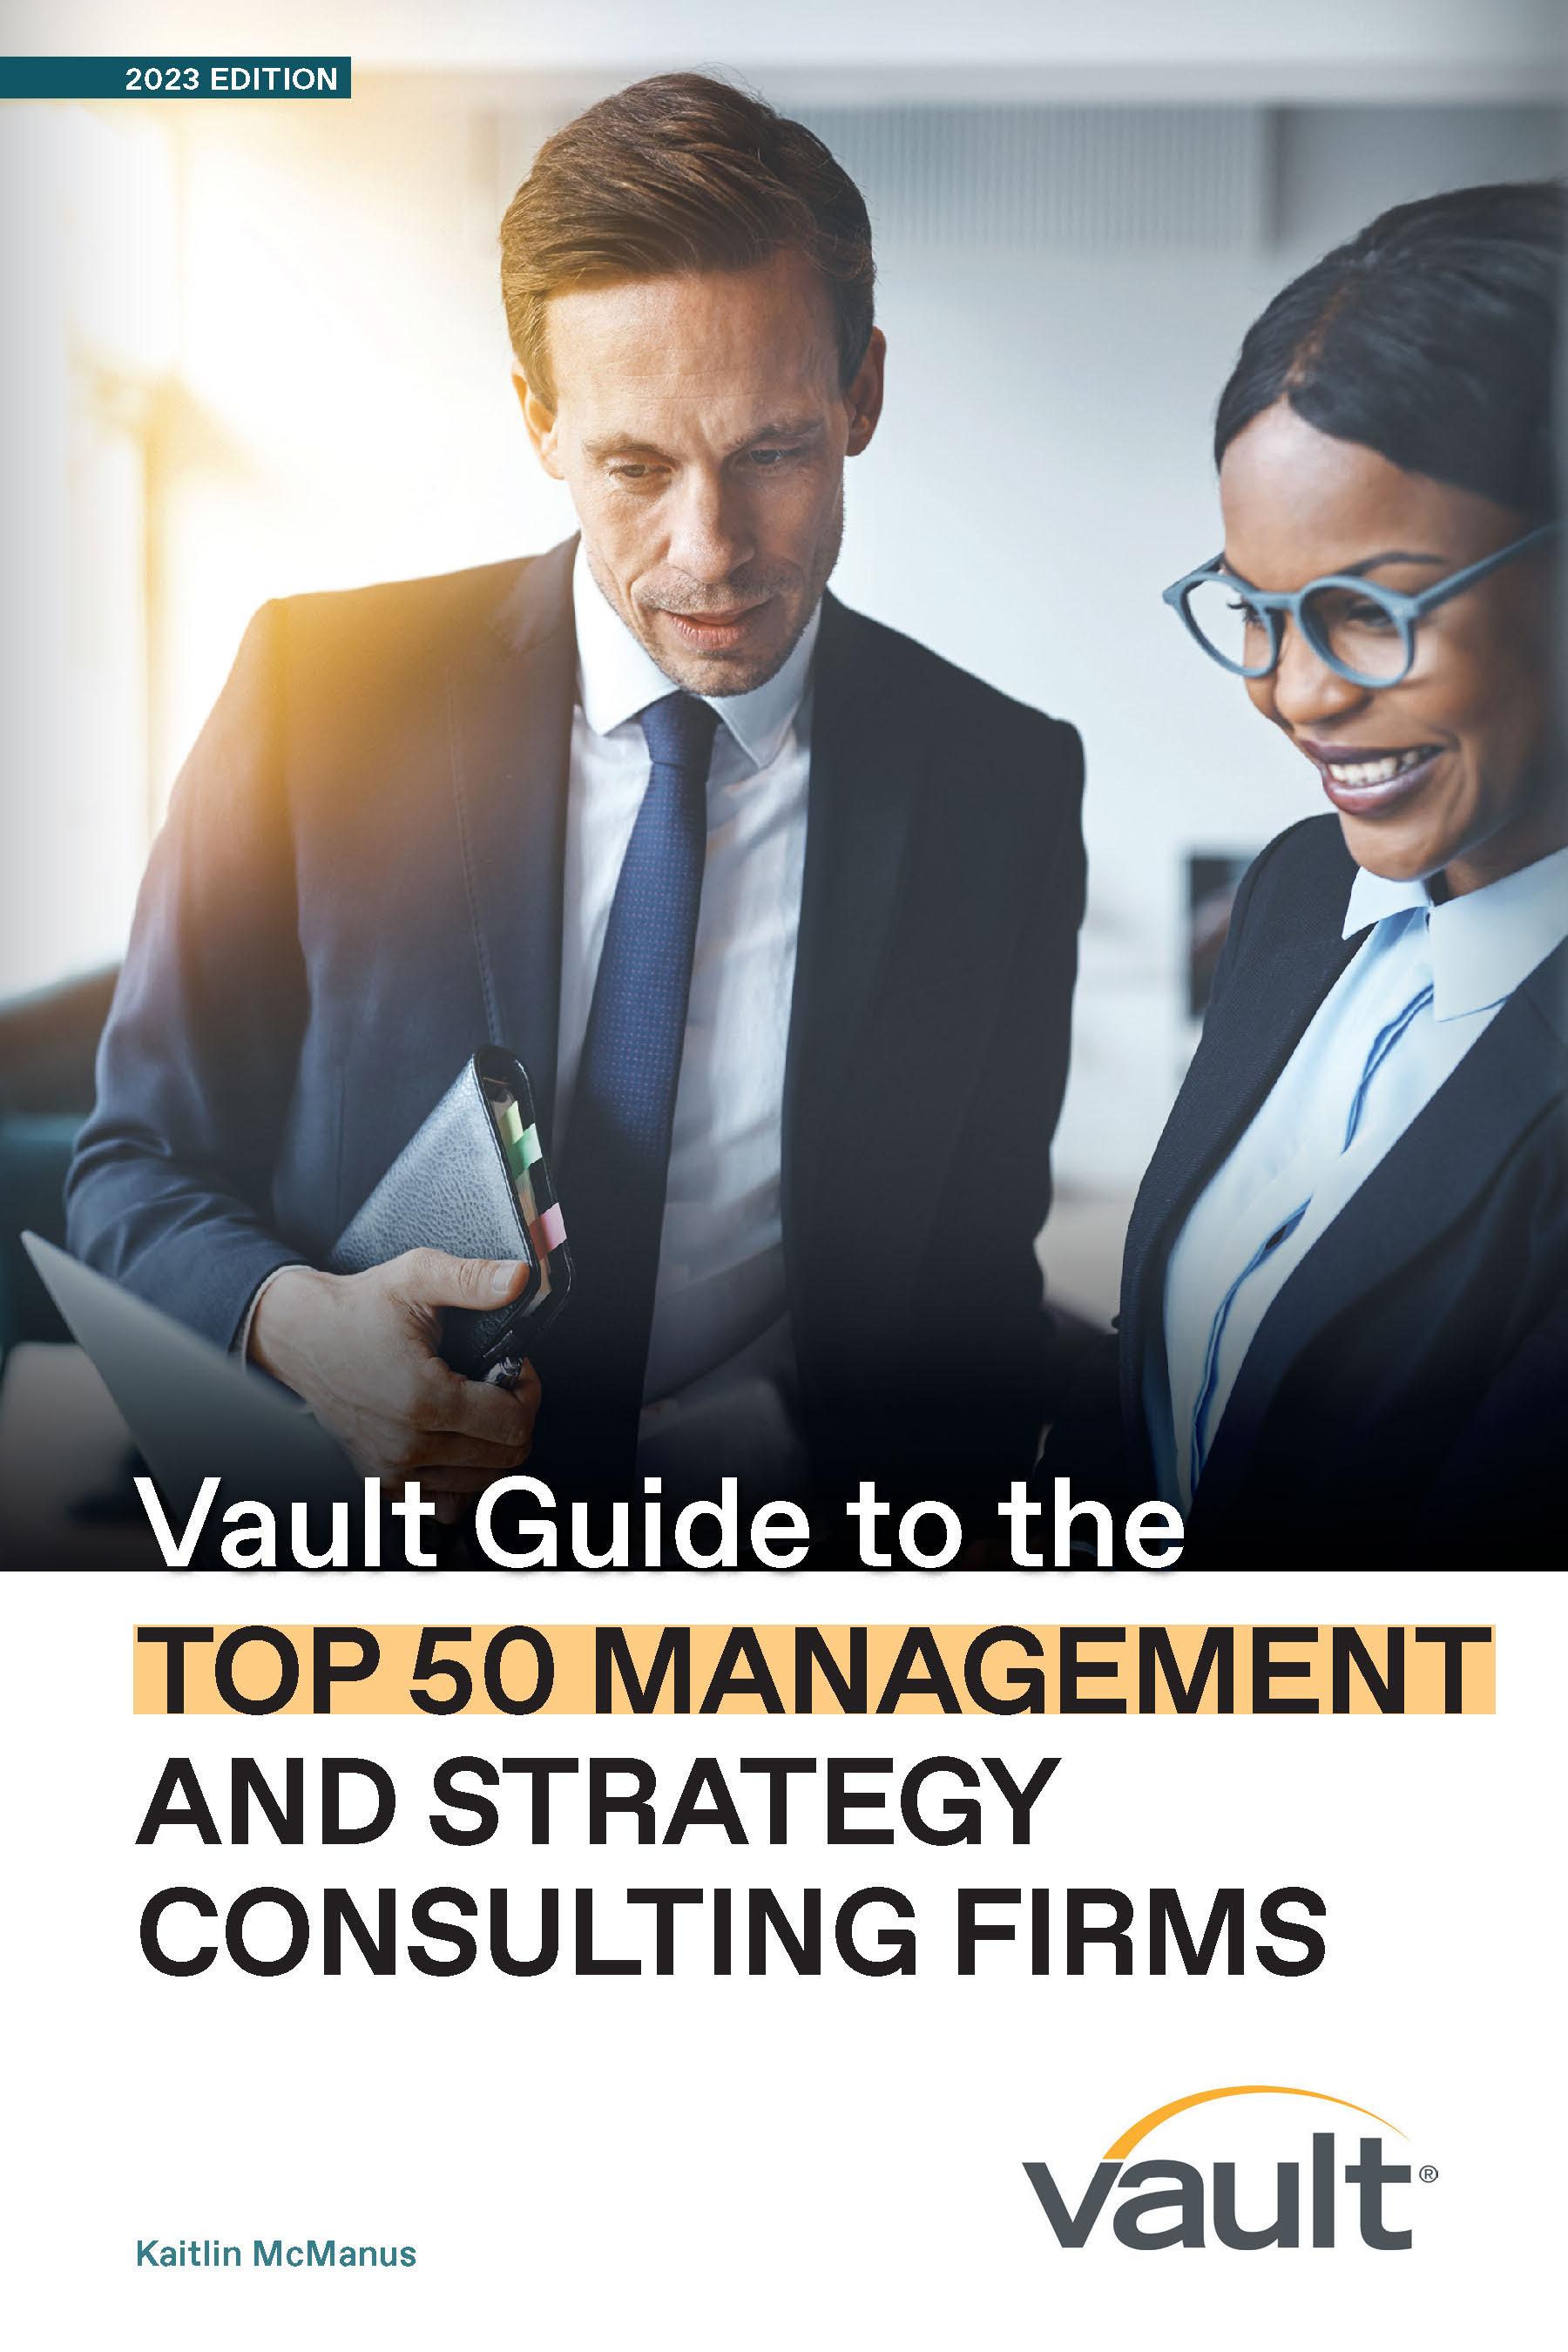 Vault Guide to the Top 50 Management and Strategy Consulting Firms